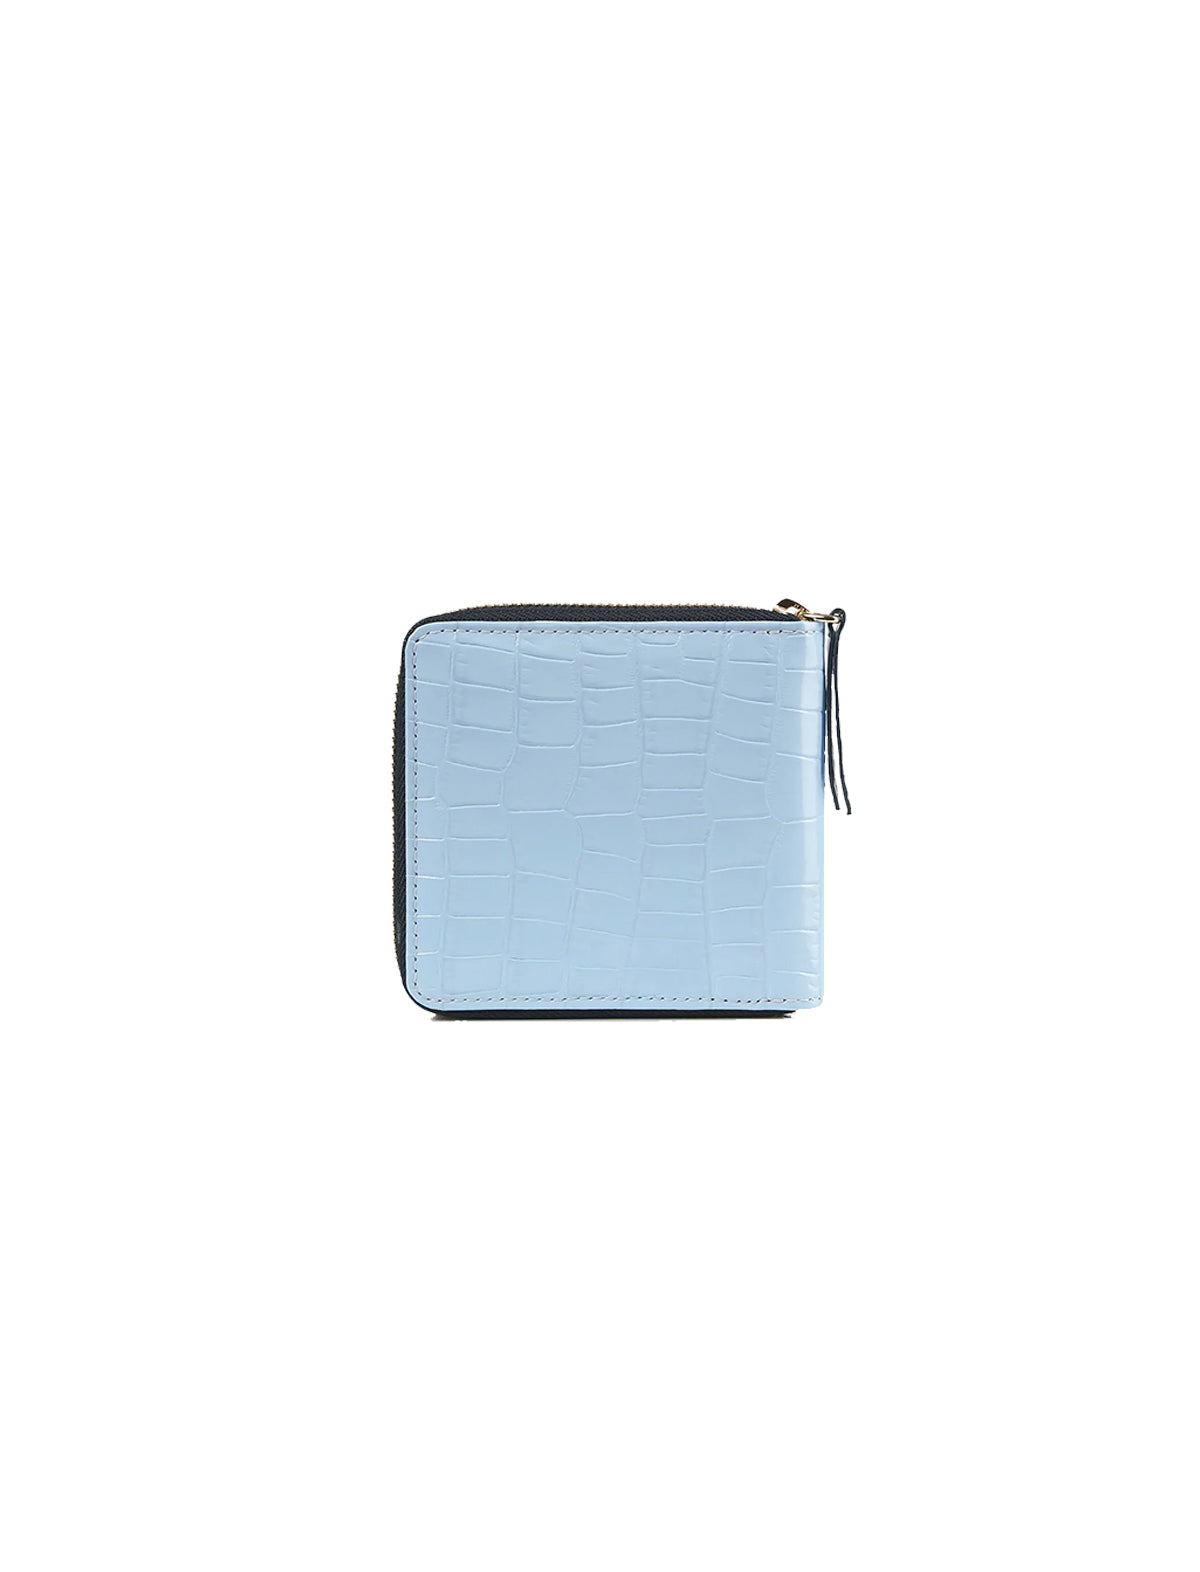 STRATHBERRY Rose Street Wallet Embossed Croc Leather in Powder Blue/Navy